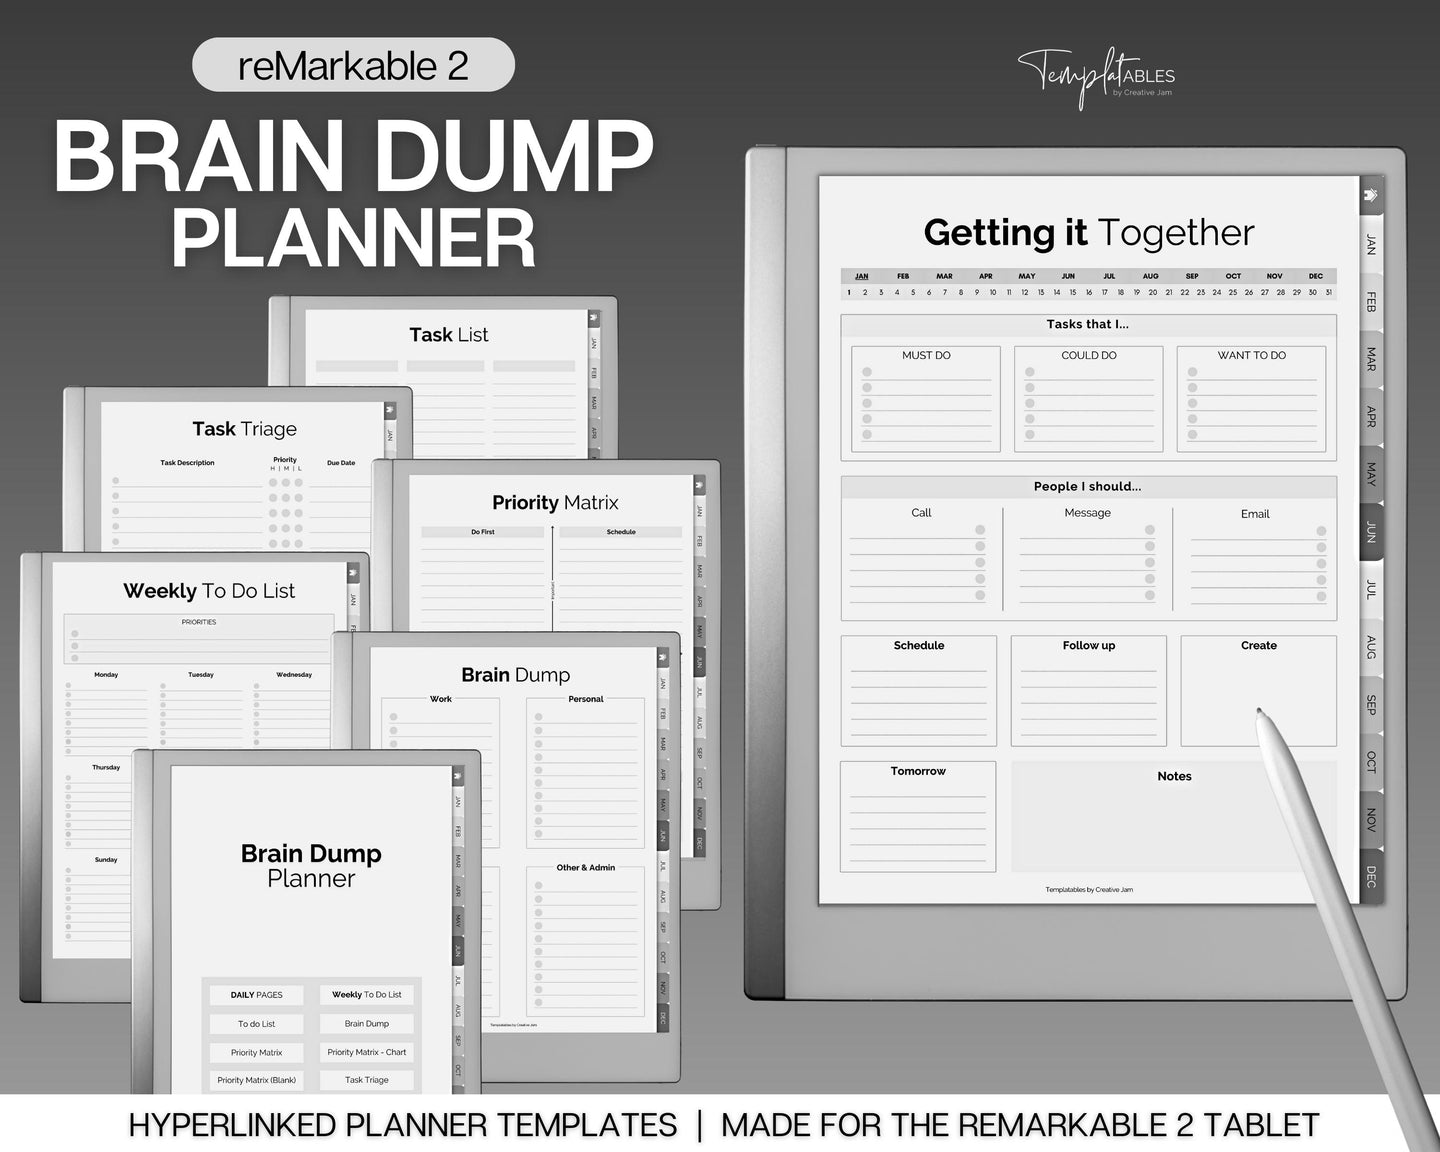 reMarkable 2 Brain Dump Planner | Digital To Do List Printable & ADHD Daily Productivity Planner